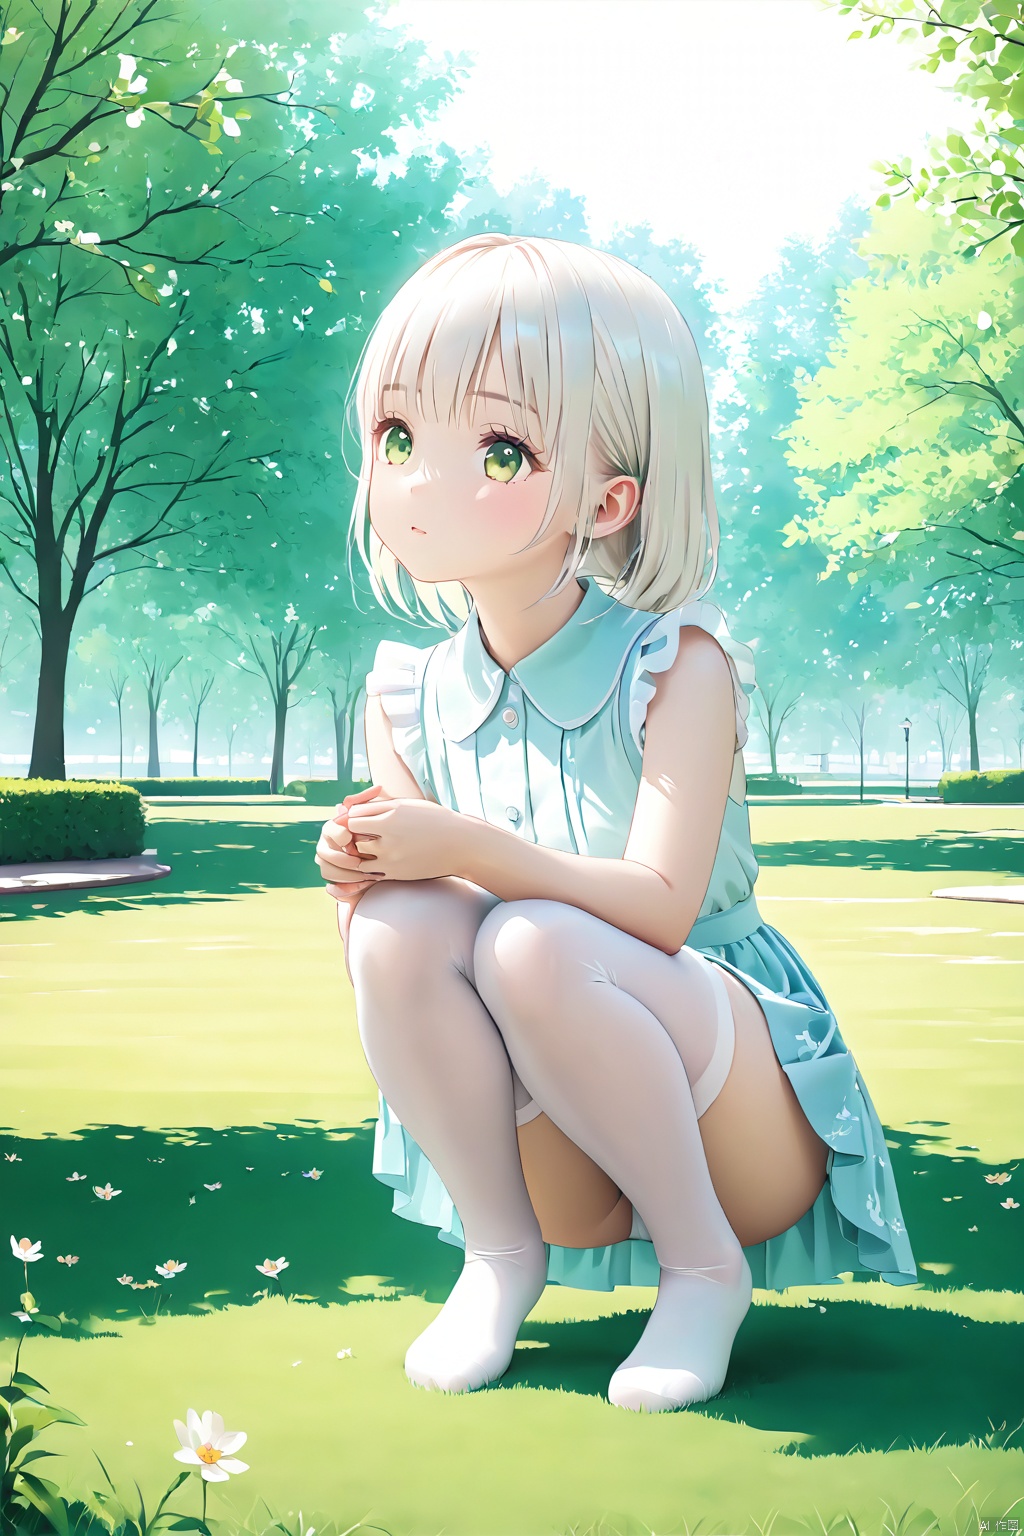 Masterpiece, photo-realistic, superior quality, 8K render, highly detailed anime-styled girl, solo character, squatting pose, high-resolution imagery, delicate smooth skin texture, youthful and innocent facial expression, meticulous attention to intricate details, vivid color scheme, artistic illustration style, exceptionally sharp focus on facial features and eyes, precise lighting with soft shadows emphasizing contours, dressed in a pure white knee-high stockings, complemented by a fashionable outfit, set against an ambient springtime background, urban or park setting.